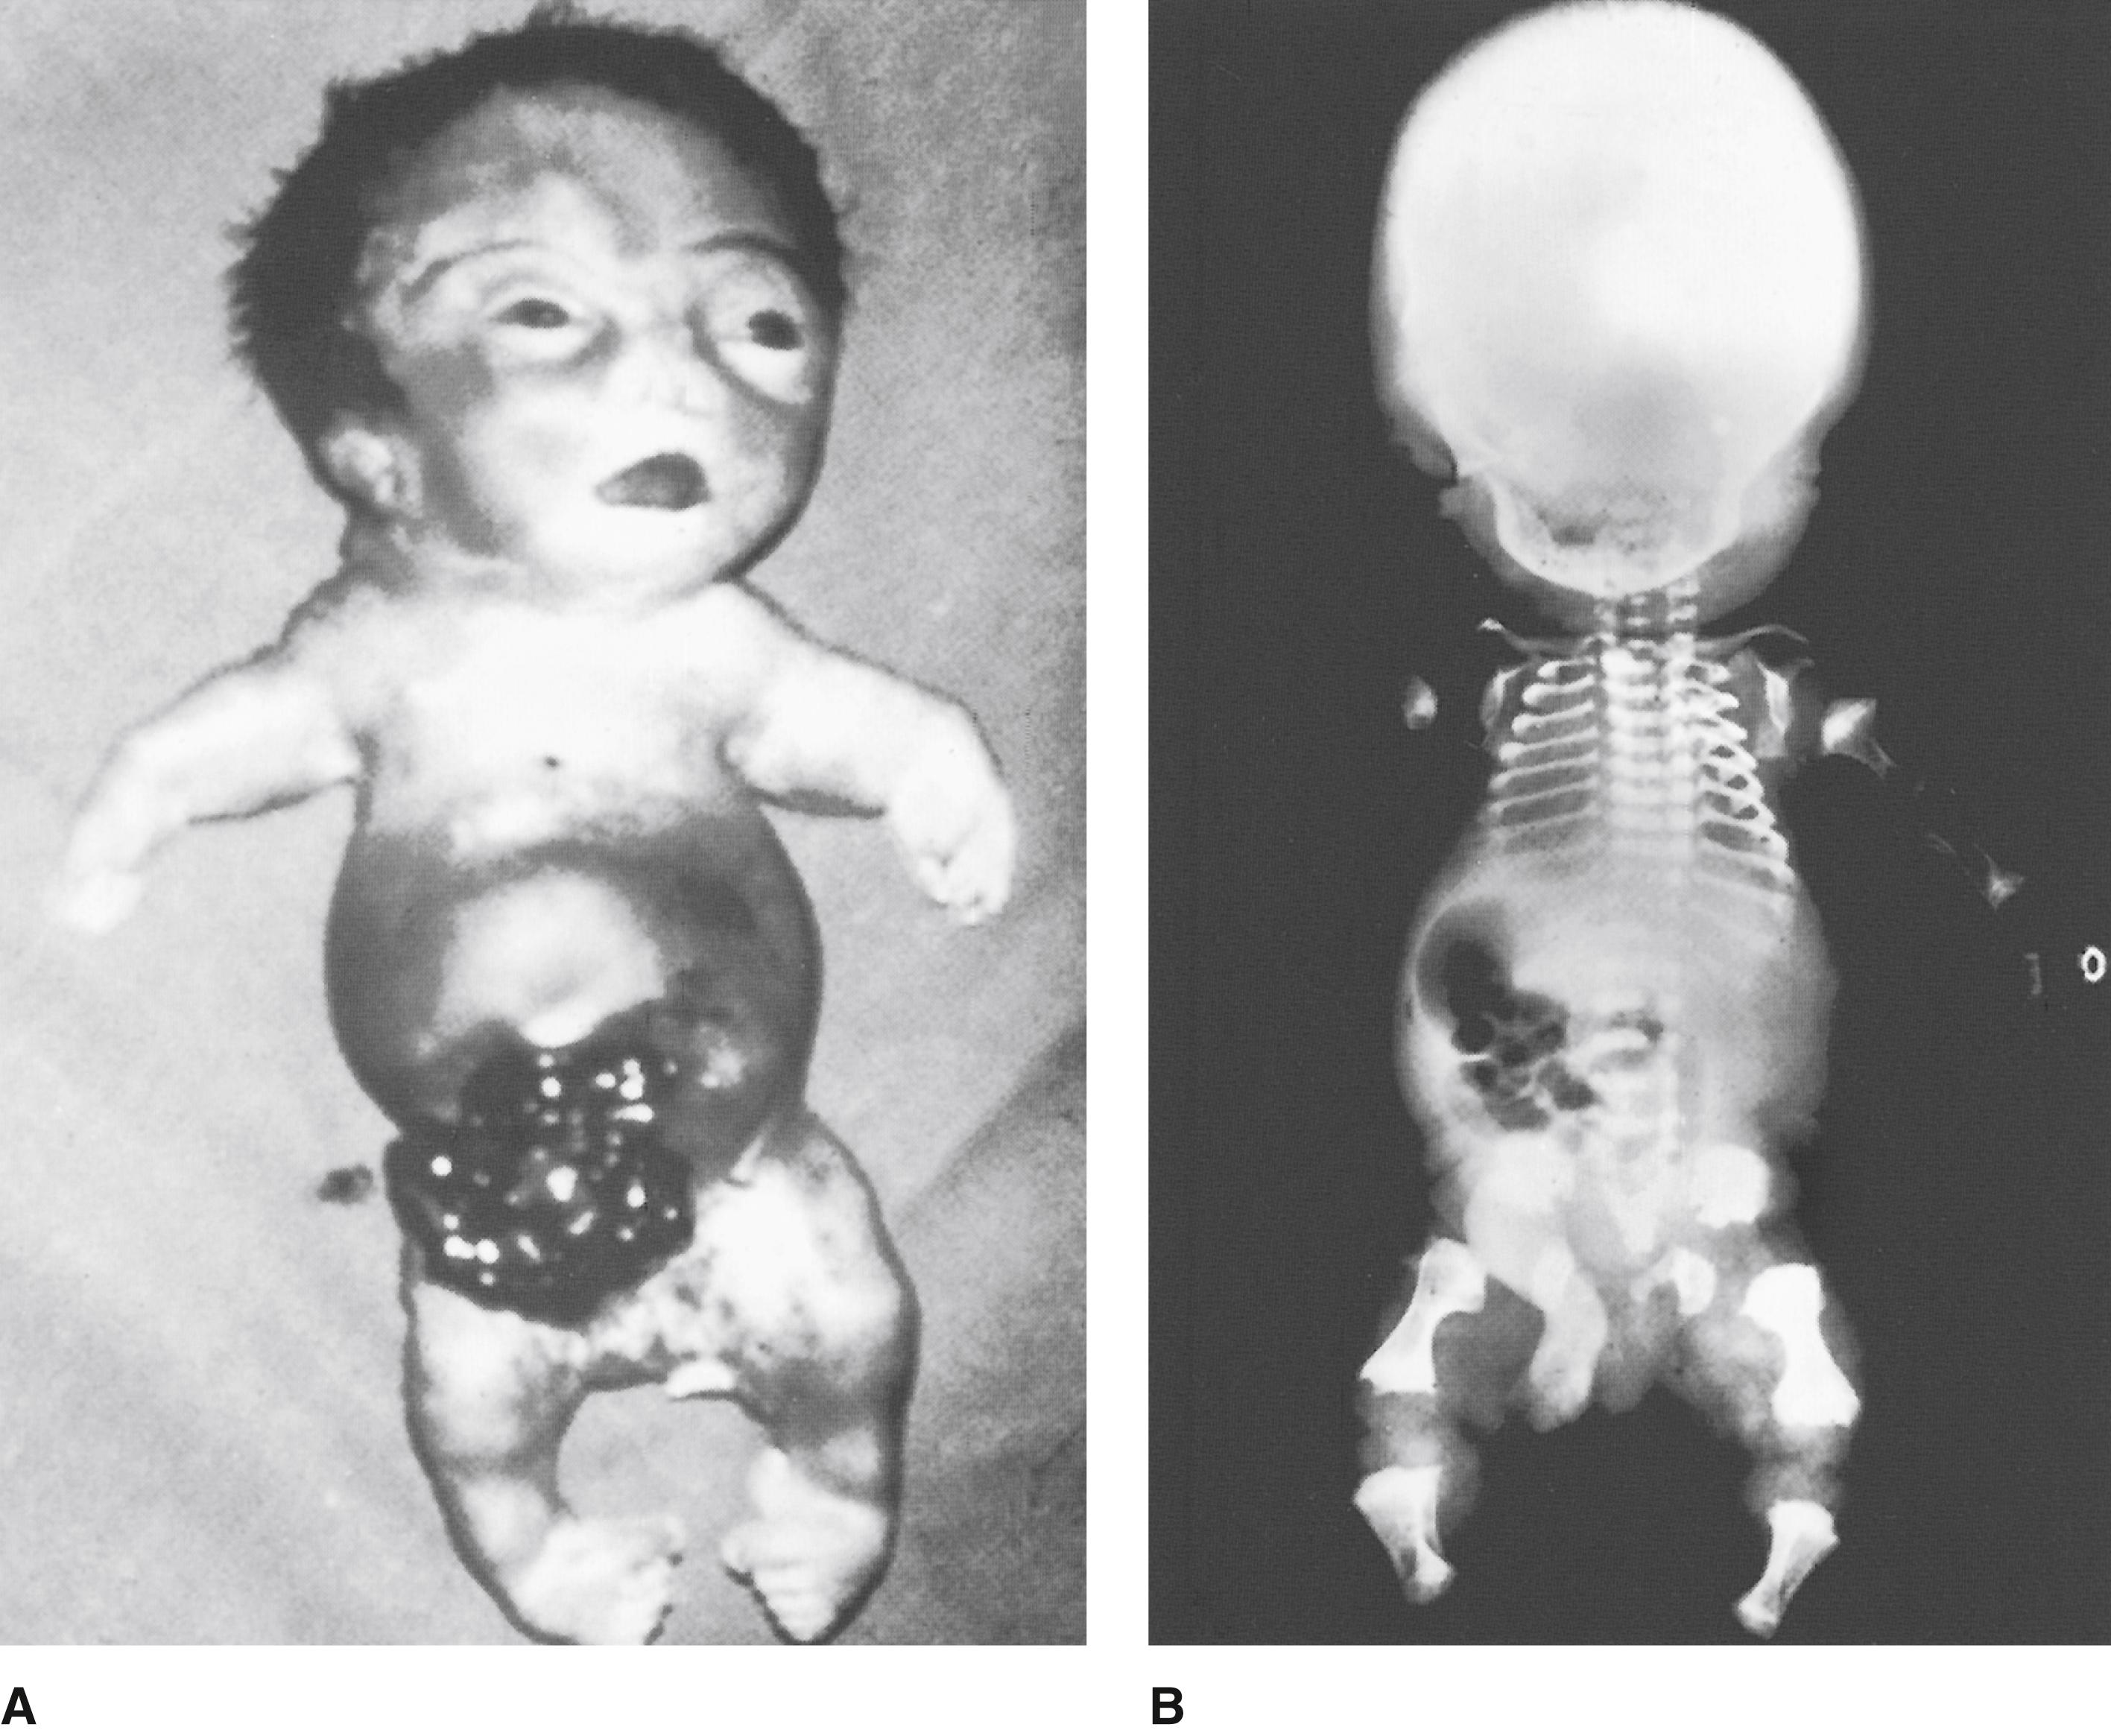 FIGURE 1, A, Stillborn infant with fibrochondrogenesis. Note the flat, wide nasal bridge, anteverted nares, short limbs, and equinovarus position of the feet. B, The radiograph reveals long, thin clavicles; short, thin ribs; flattened acetabula; narrow sacrosciatic notches; metaphyseal widening of the tibia and fibula; and dumbbell-shaped femora.